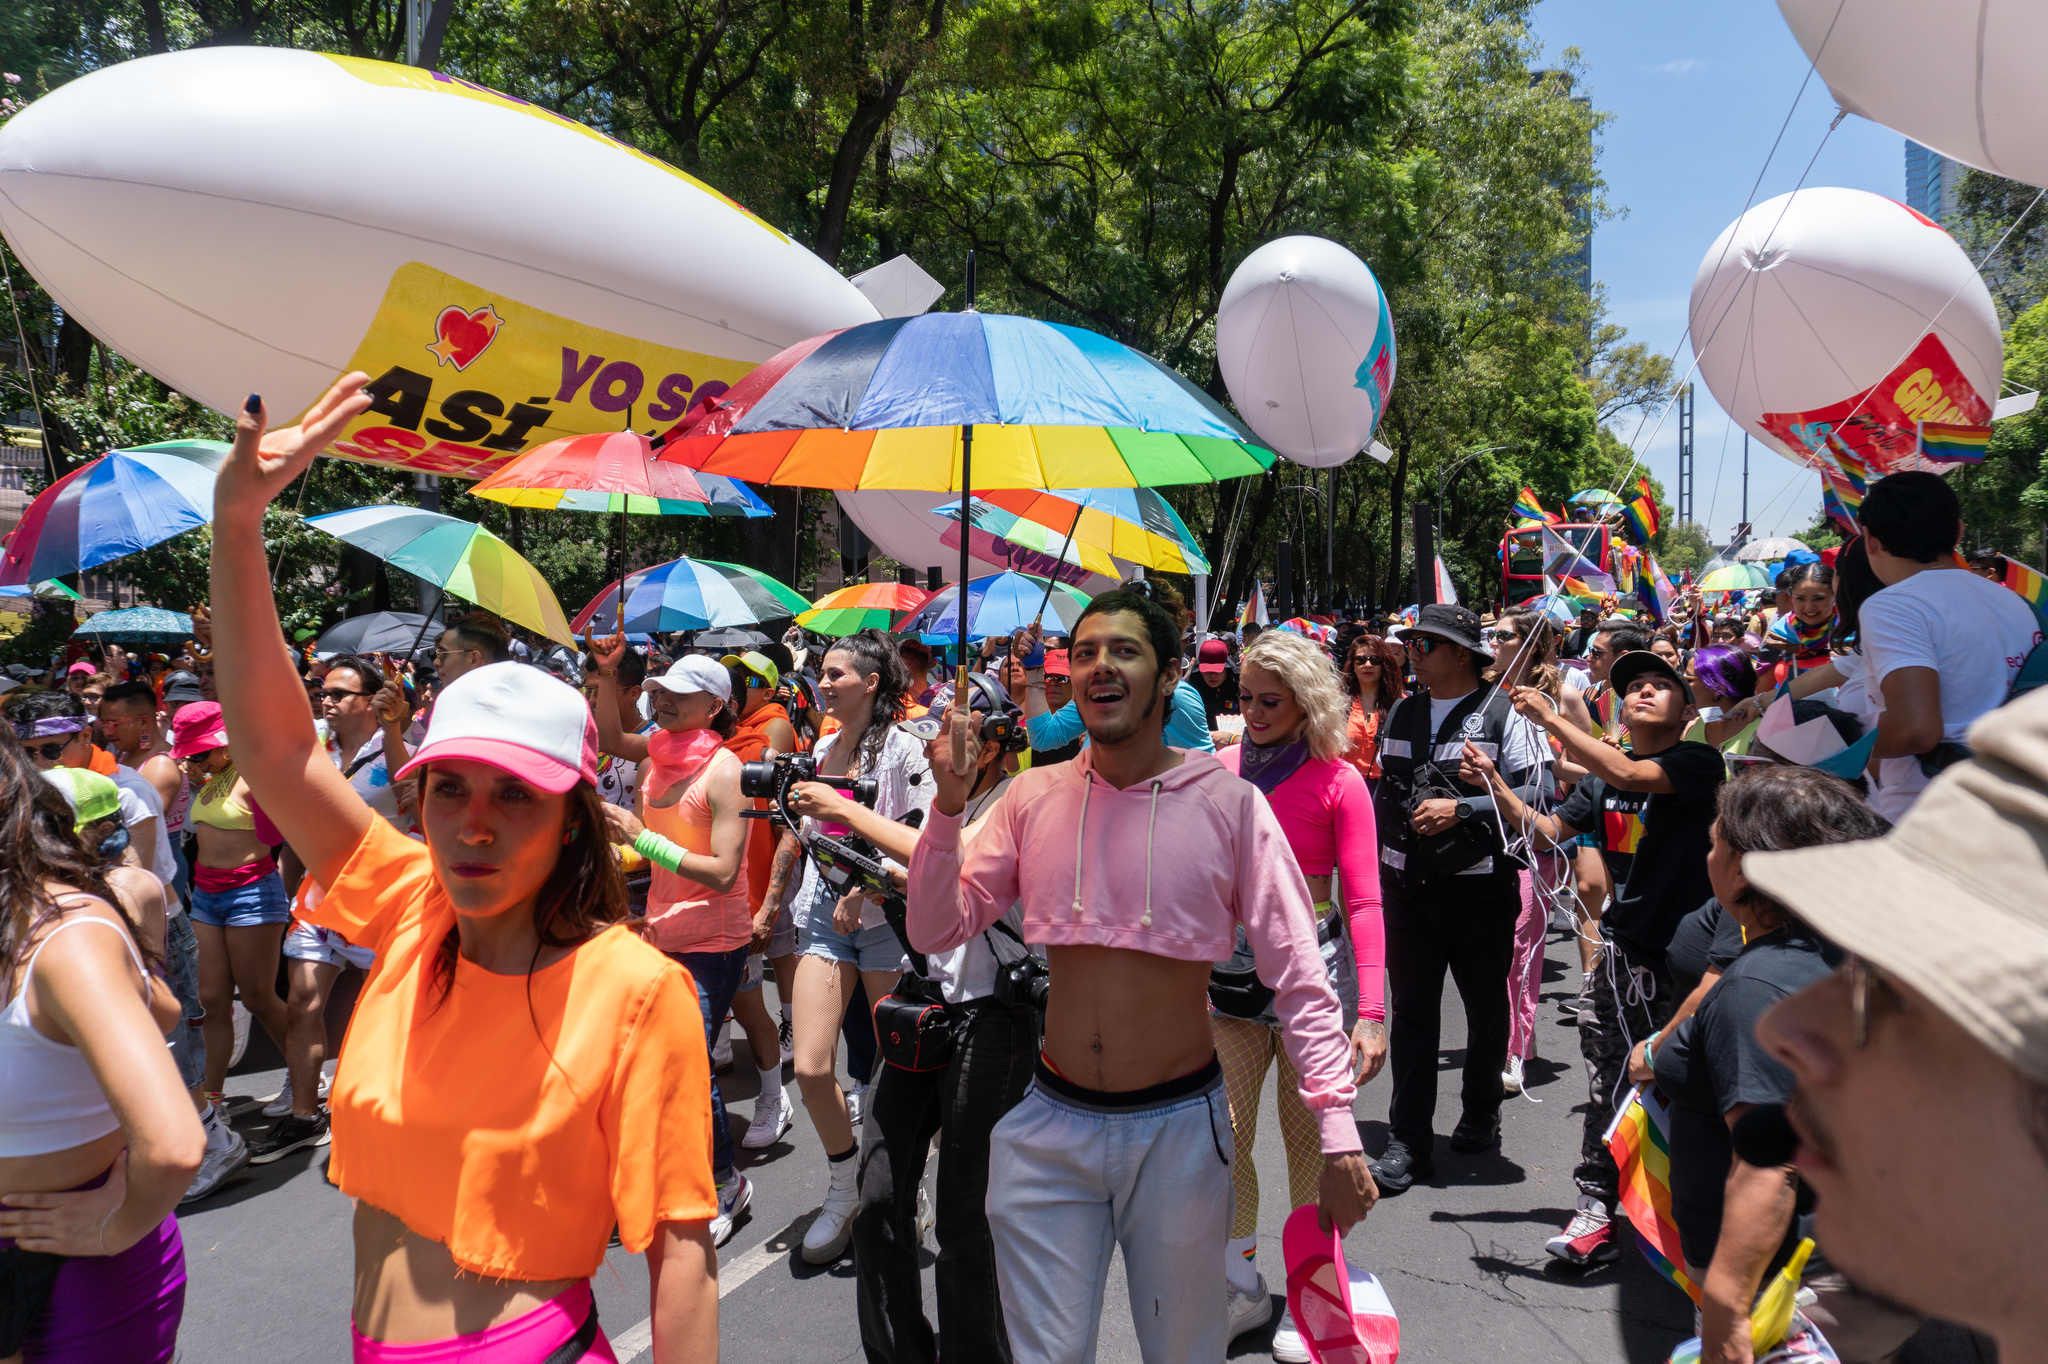 Less Party, More Protest: Activists Call for Changes to Mexico City Pride March